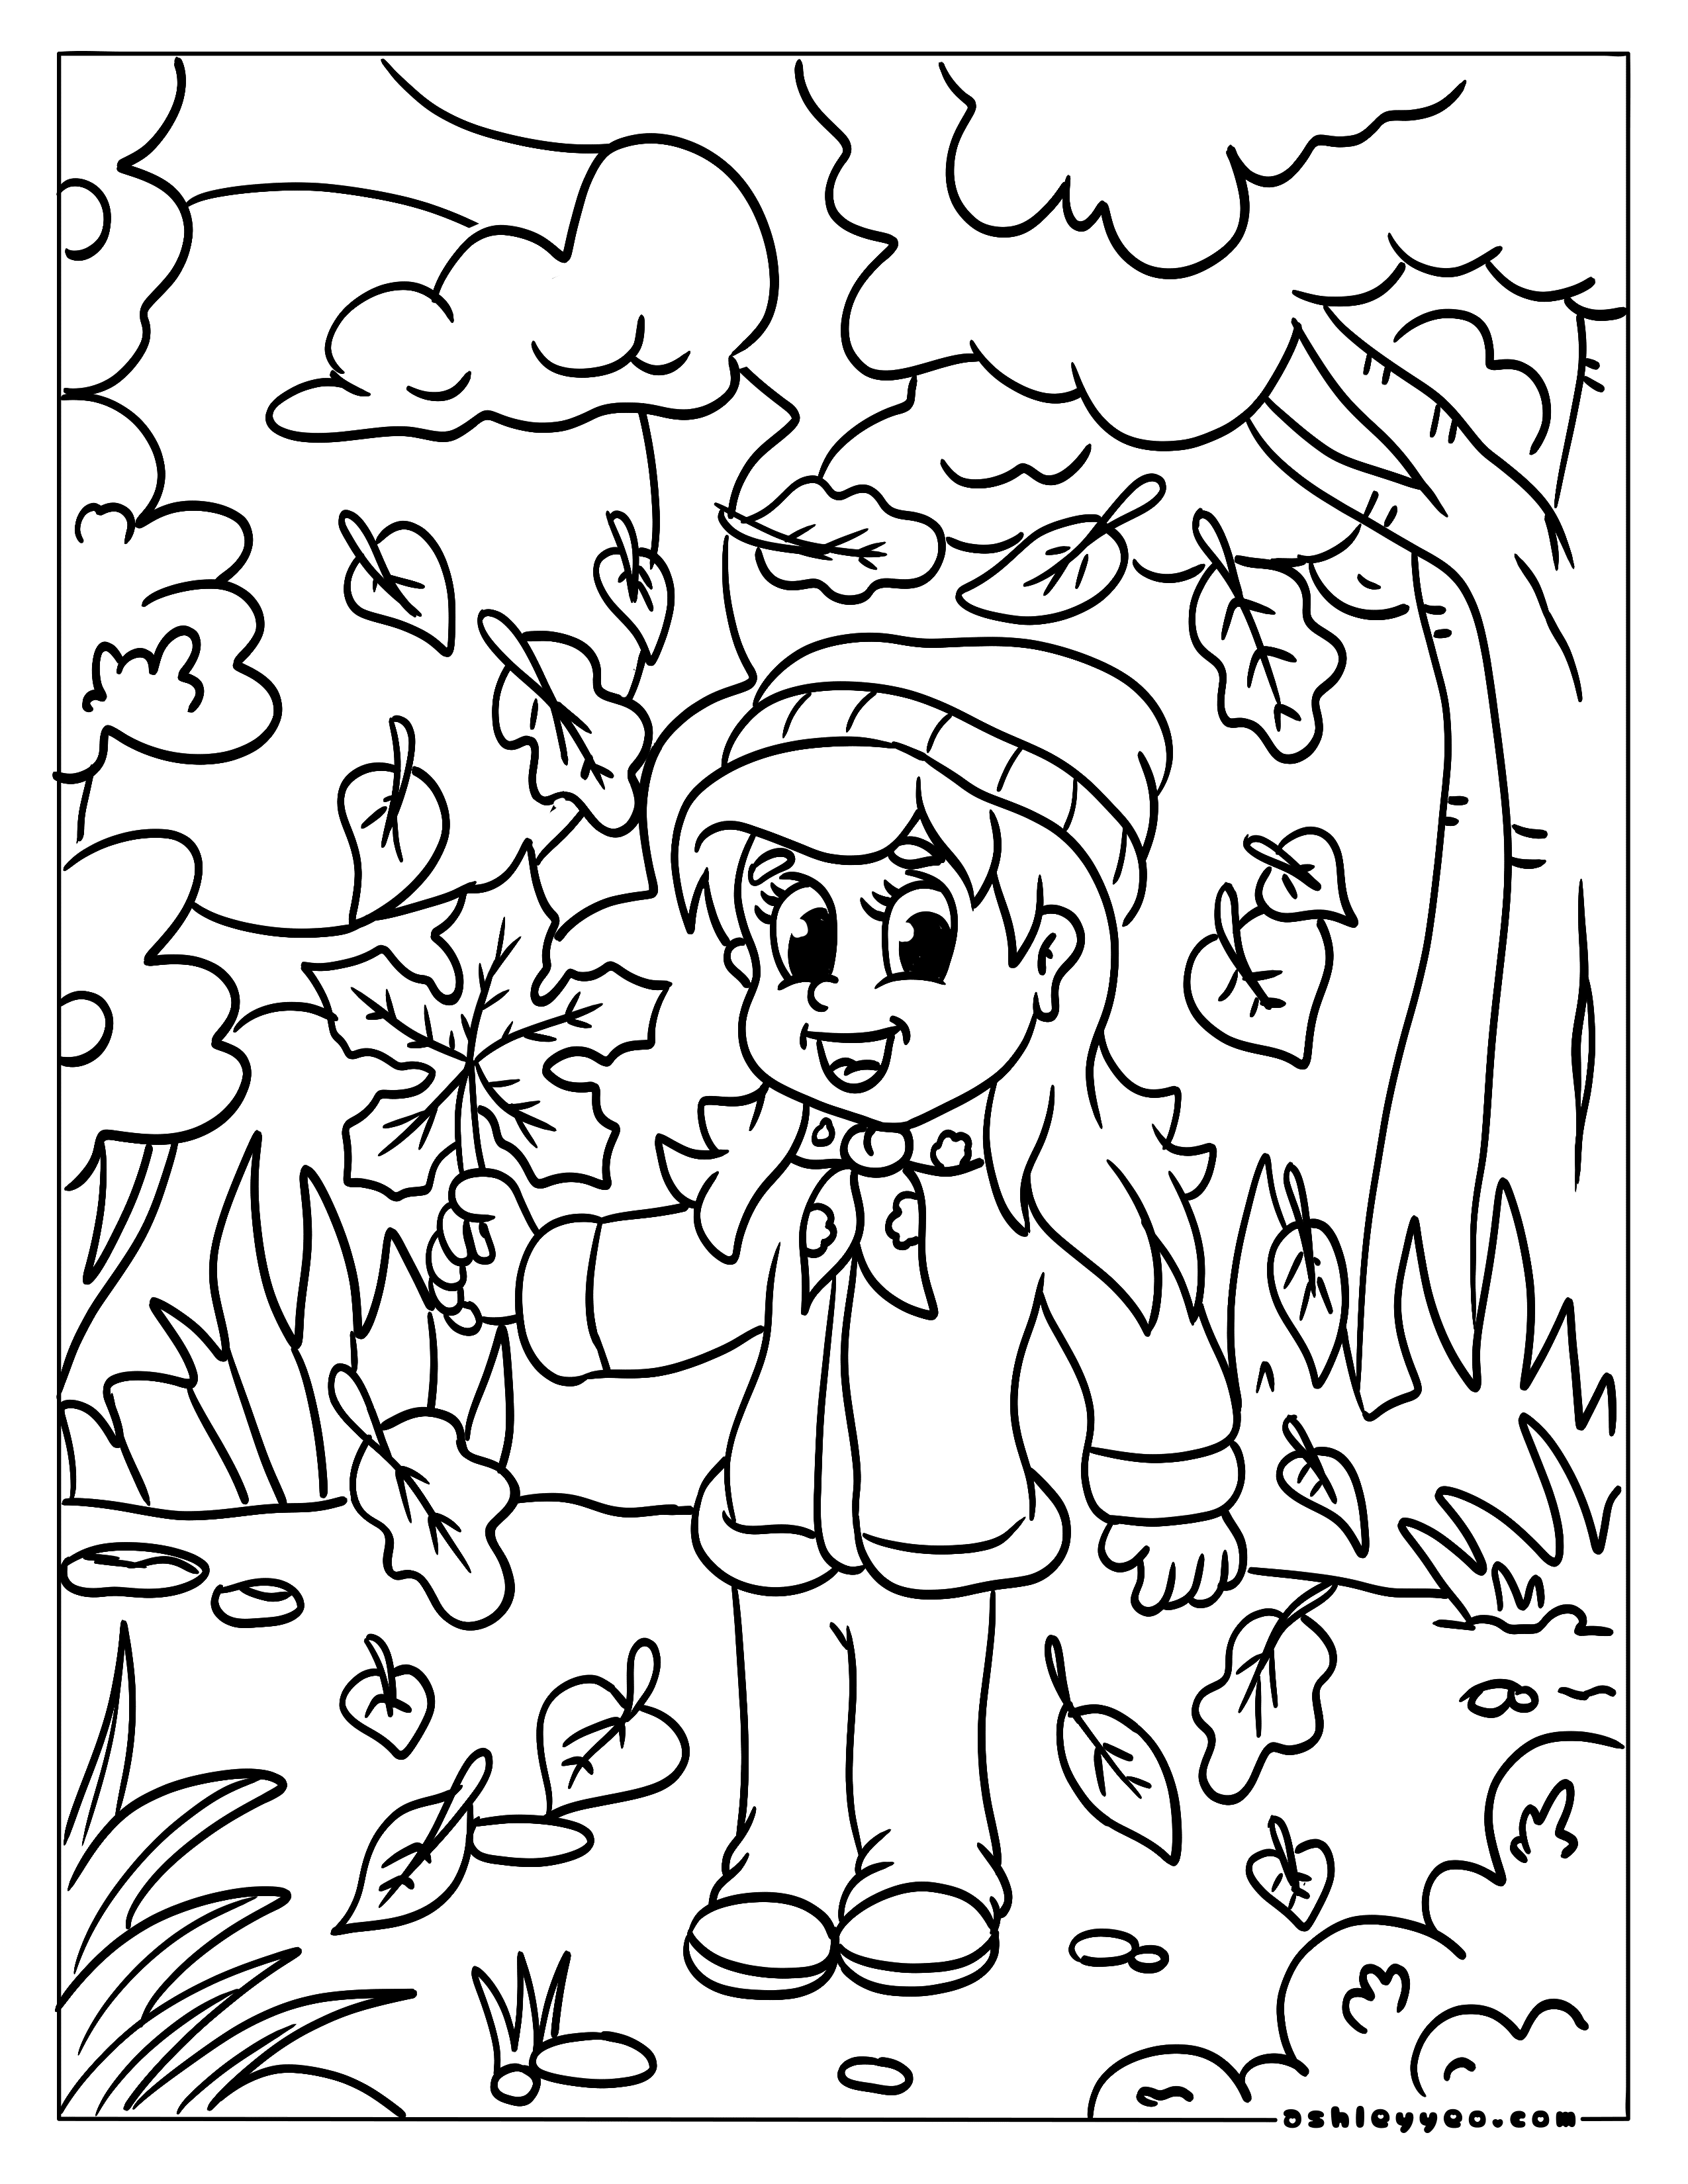 Free fall coloring pages for kids